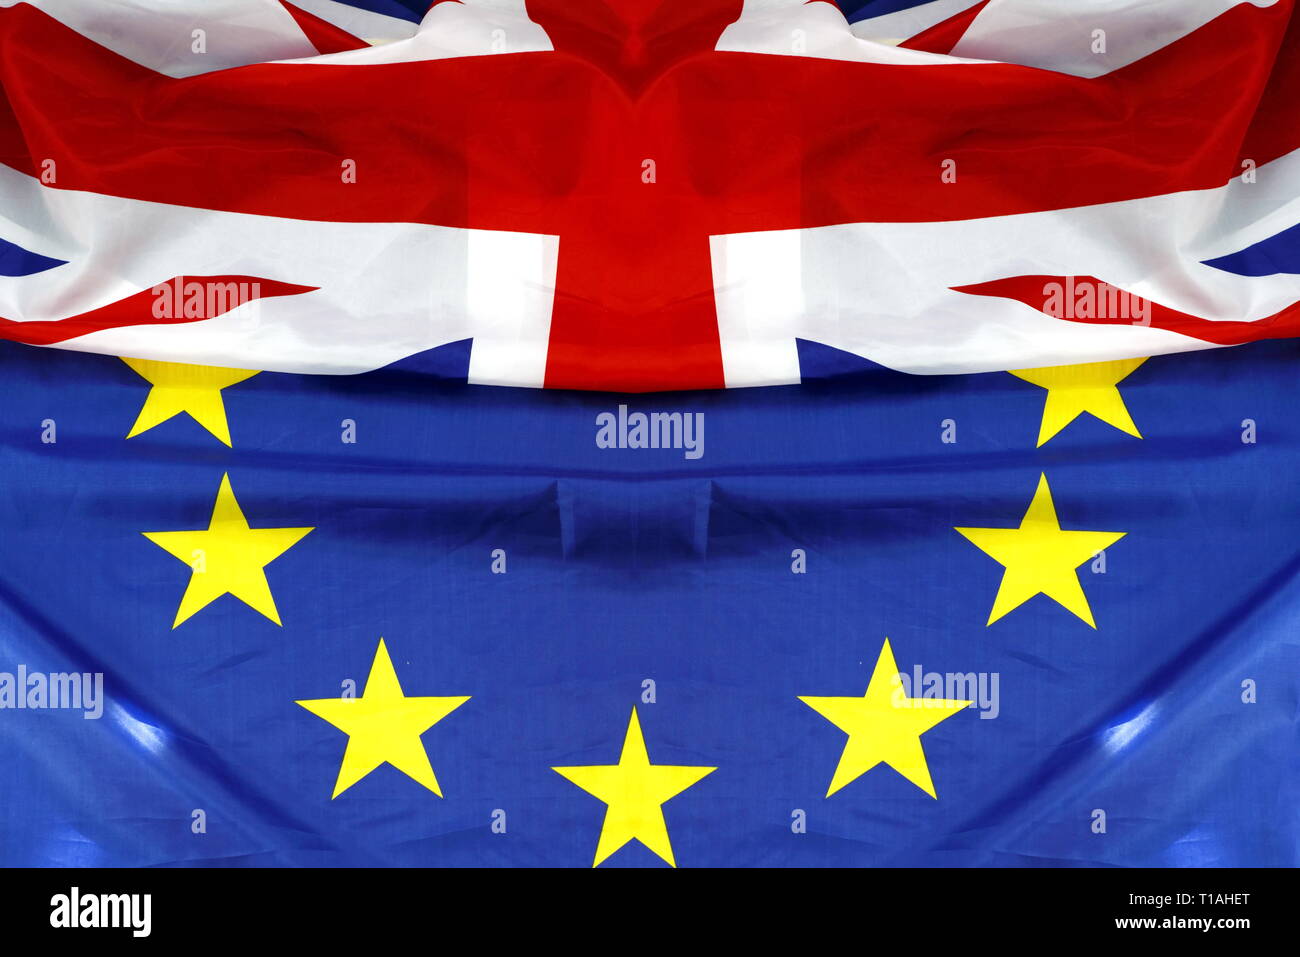 United Kingdom and European union flags combined Stock Photo